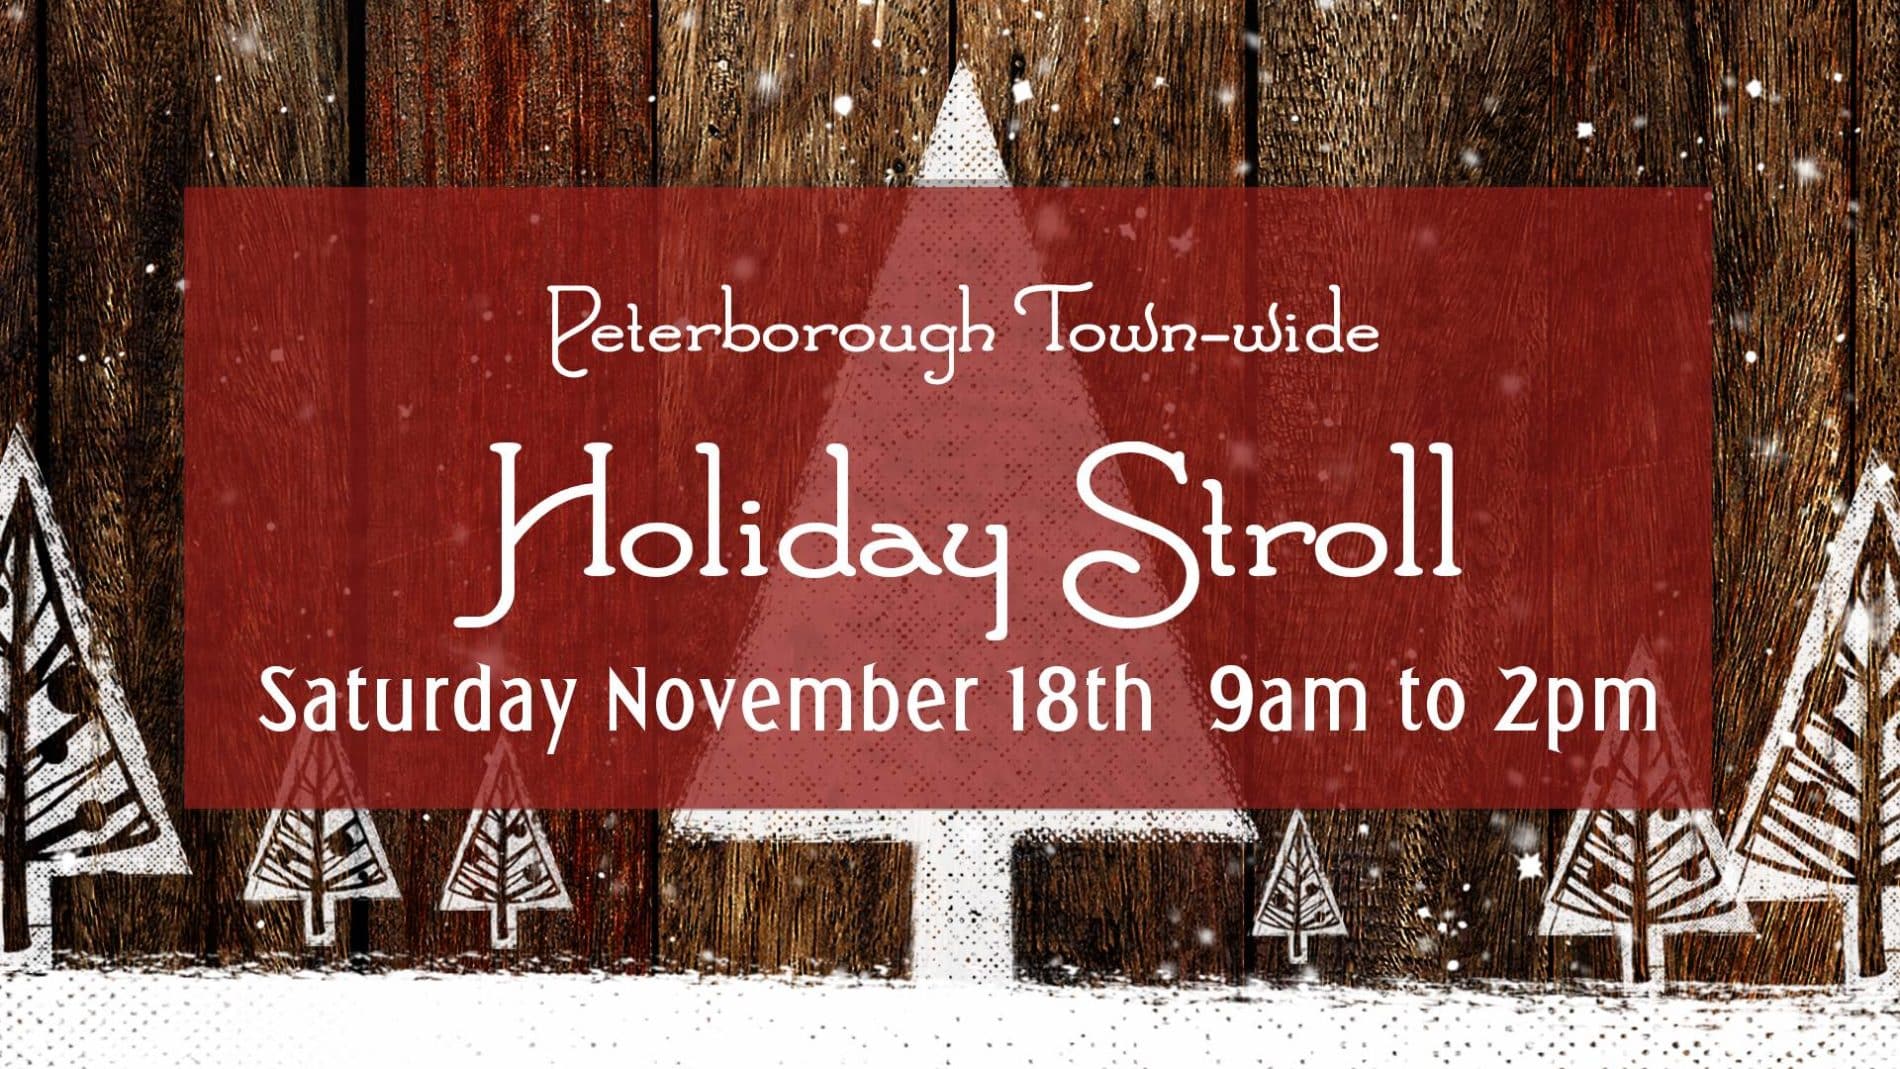 A wood sign with white trees designed on them provides a background for the Holiday Stroll hours and date